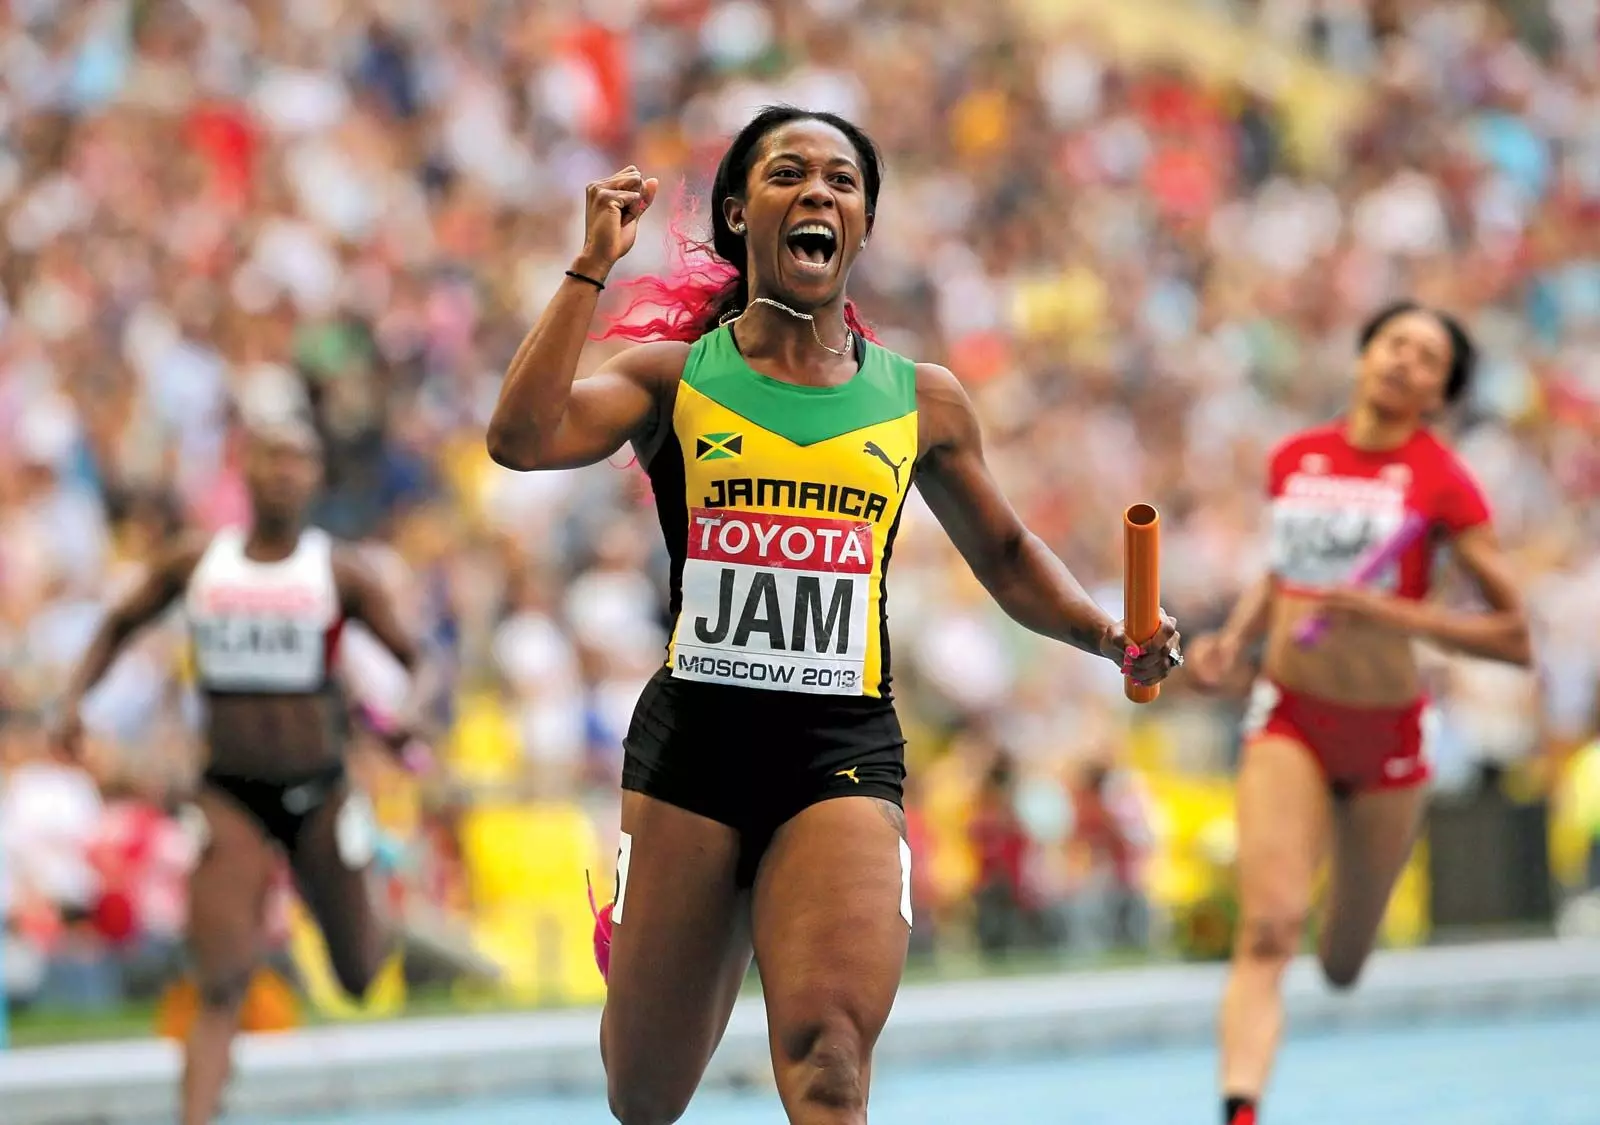 Shelly Ann Fraser Pryce is the fastest woman alive [Source: World Athletics]